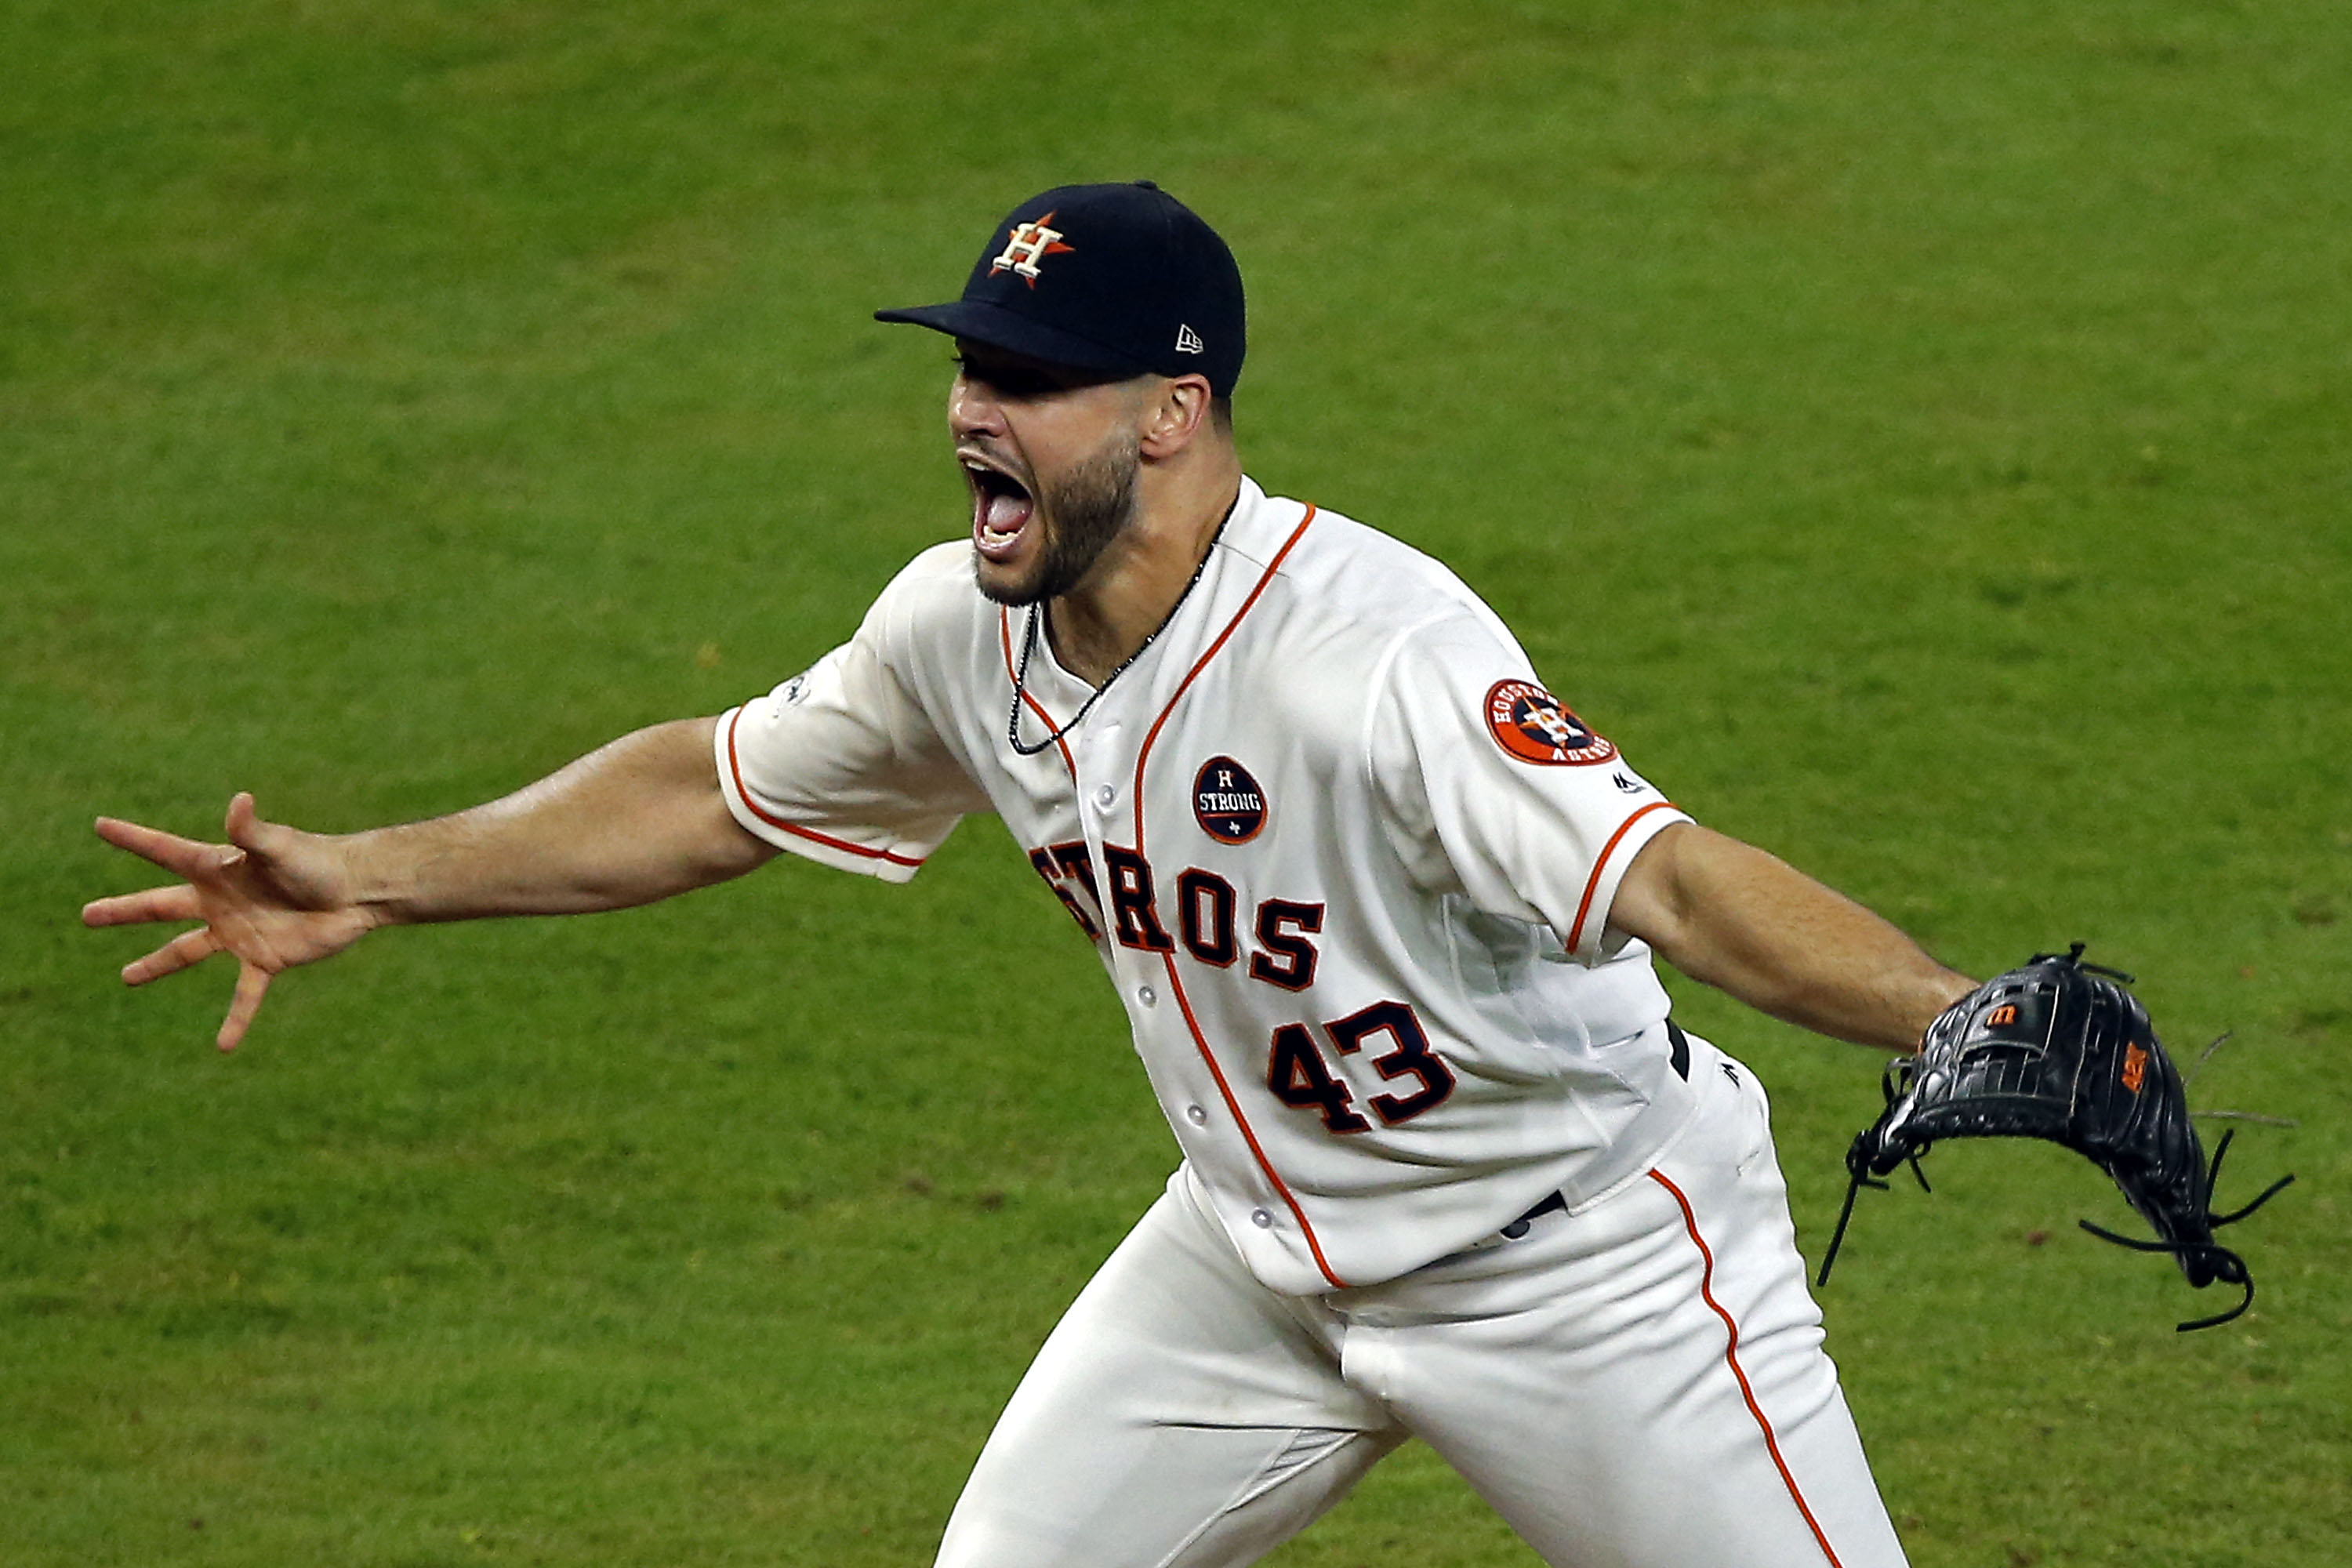 Houston Astros: Why it's a moment of redemption for Lance McCullers Jr.